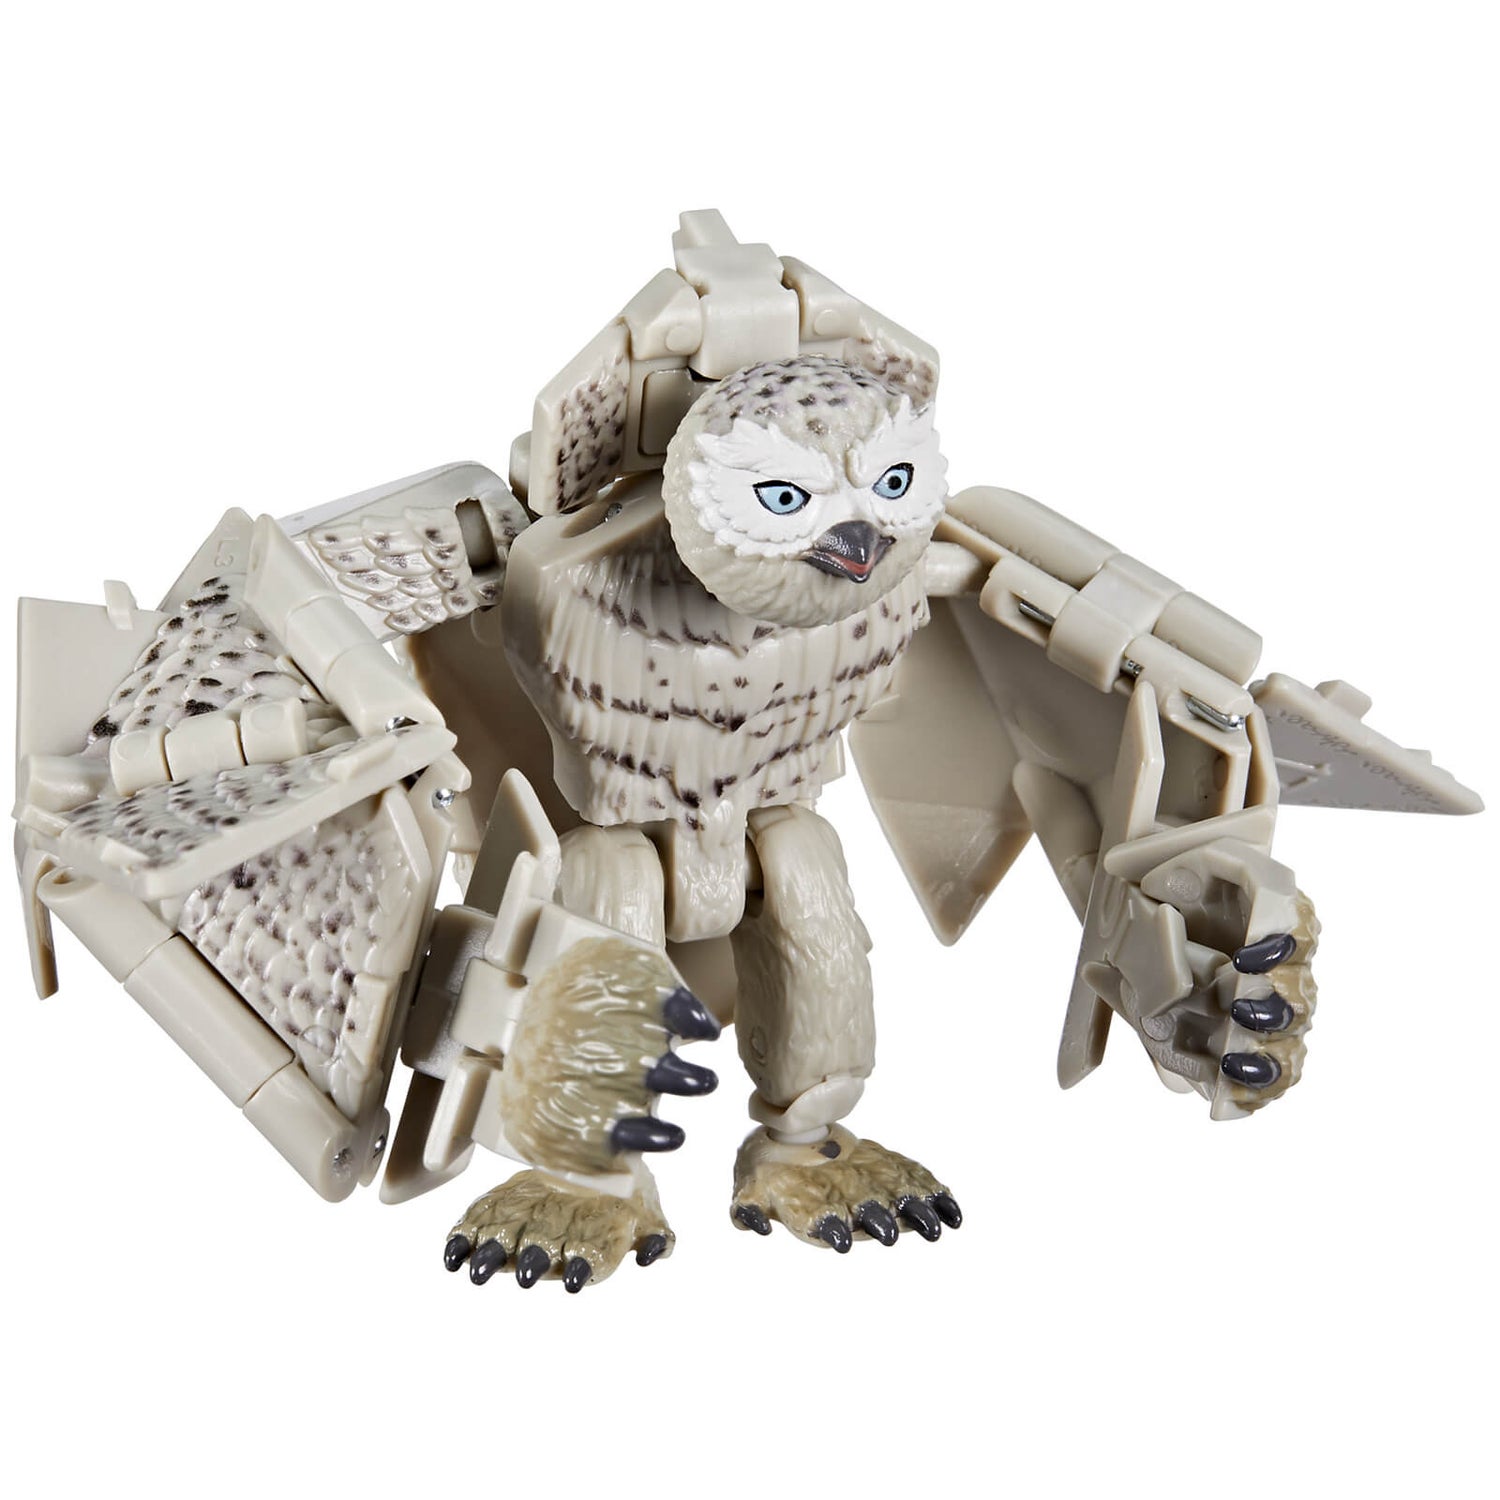 Hasbro Dungeons & Dragons Honor Among Thieves D&D Dicelings Owlbear Collectible Action Figure